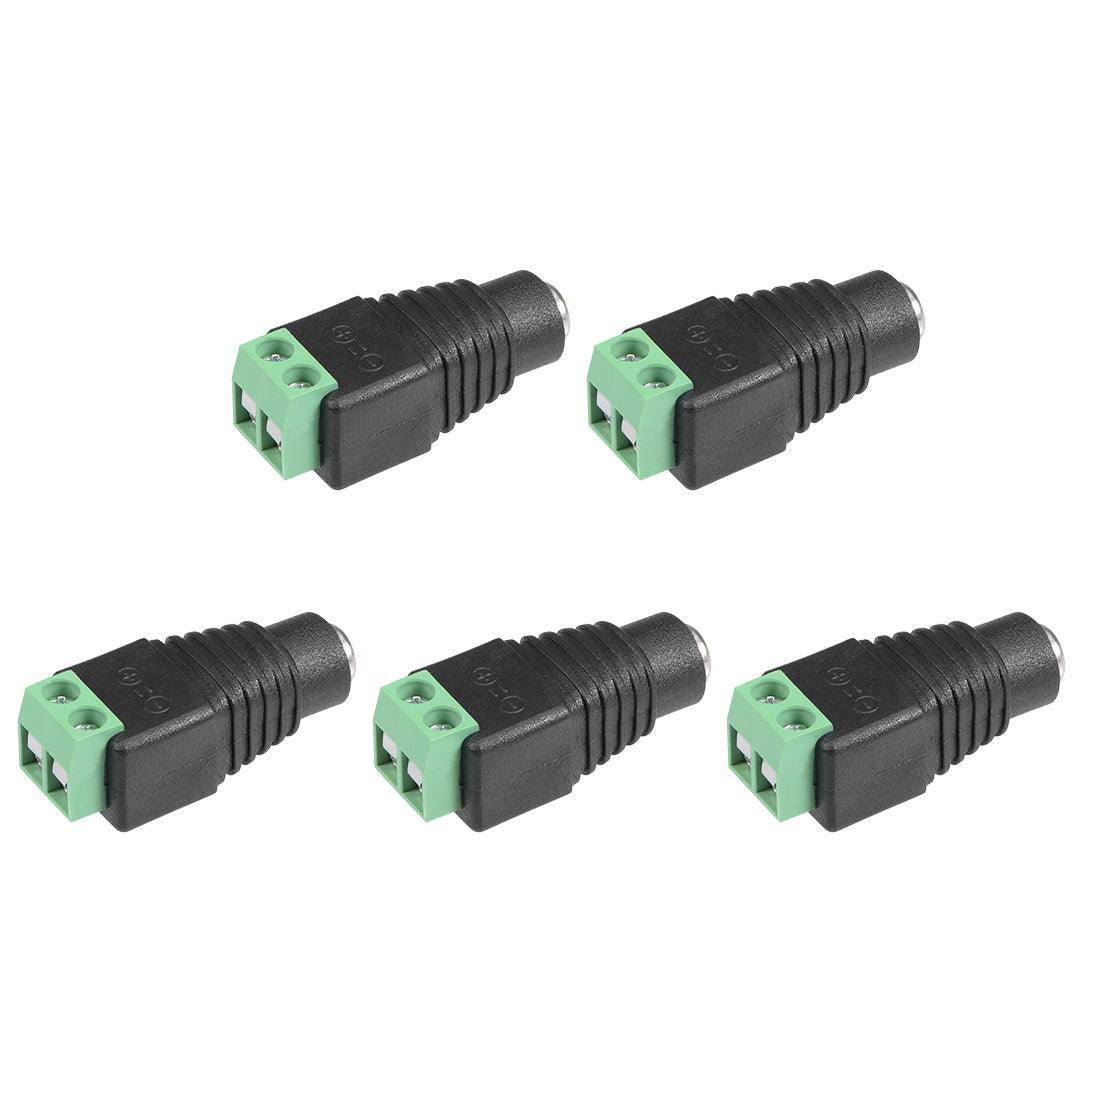 uxcell Uxcell DC Female Connector 5.5x2.1mm Power Jack Adapter 5Pcs for Led Strip CCTV Security Camera Cable Wire Ends